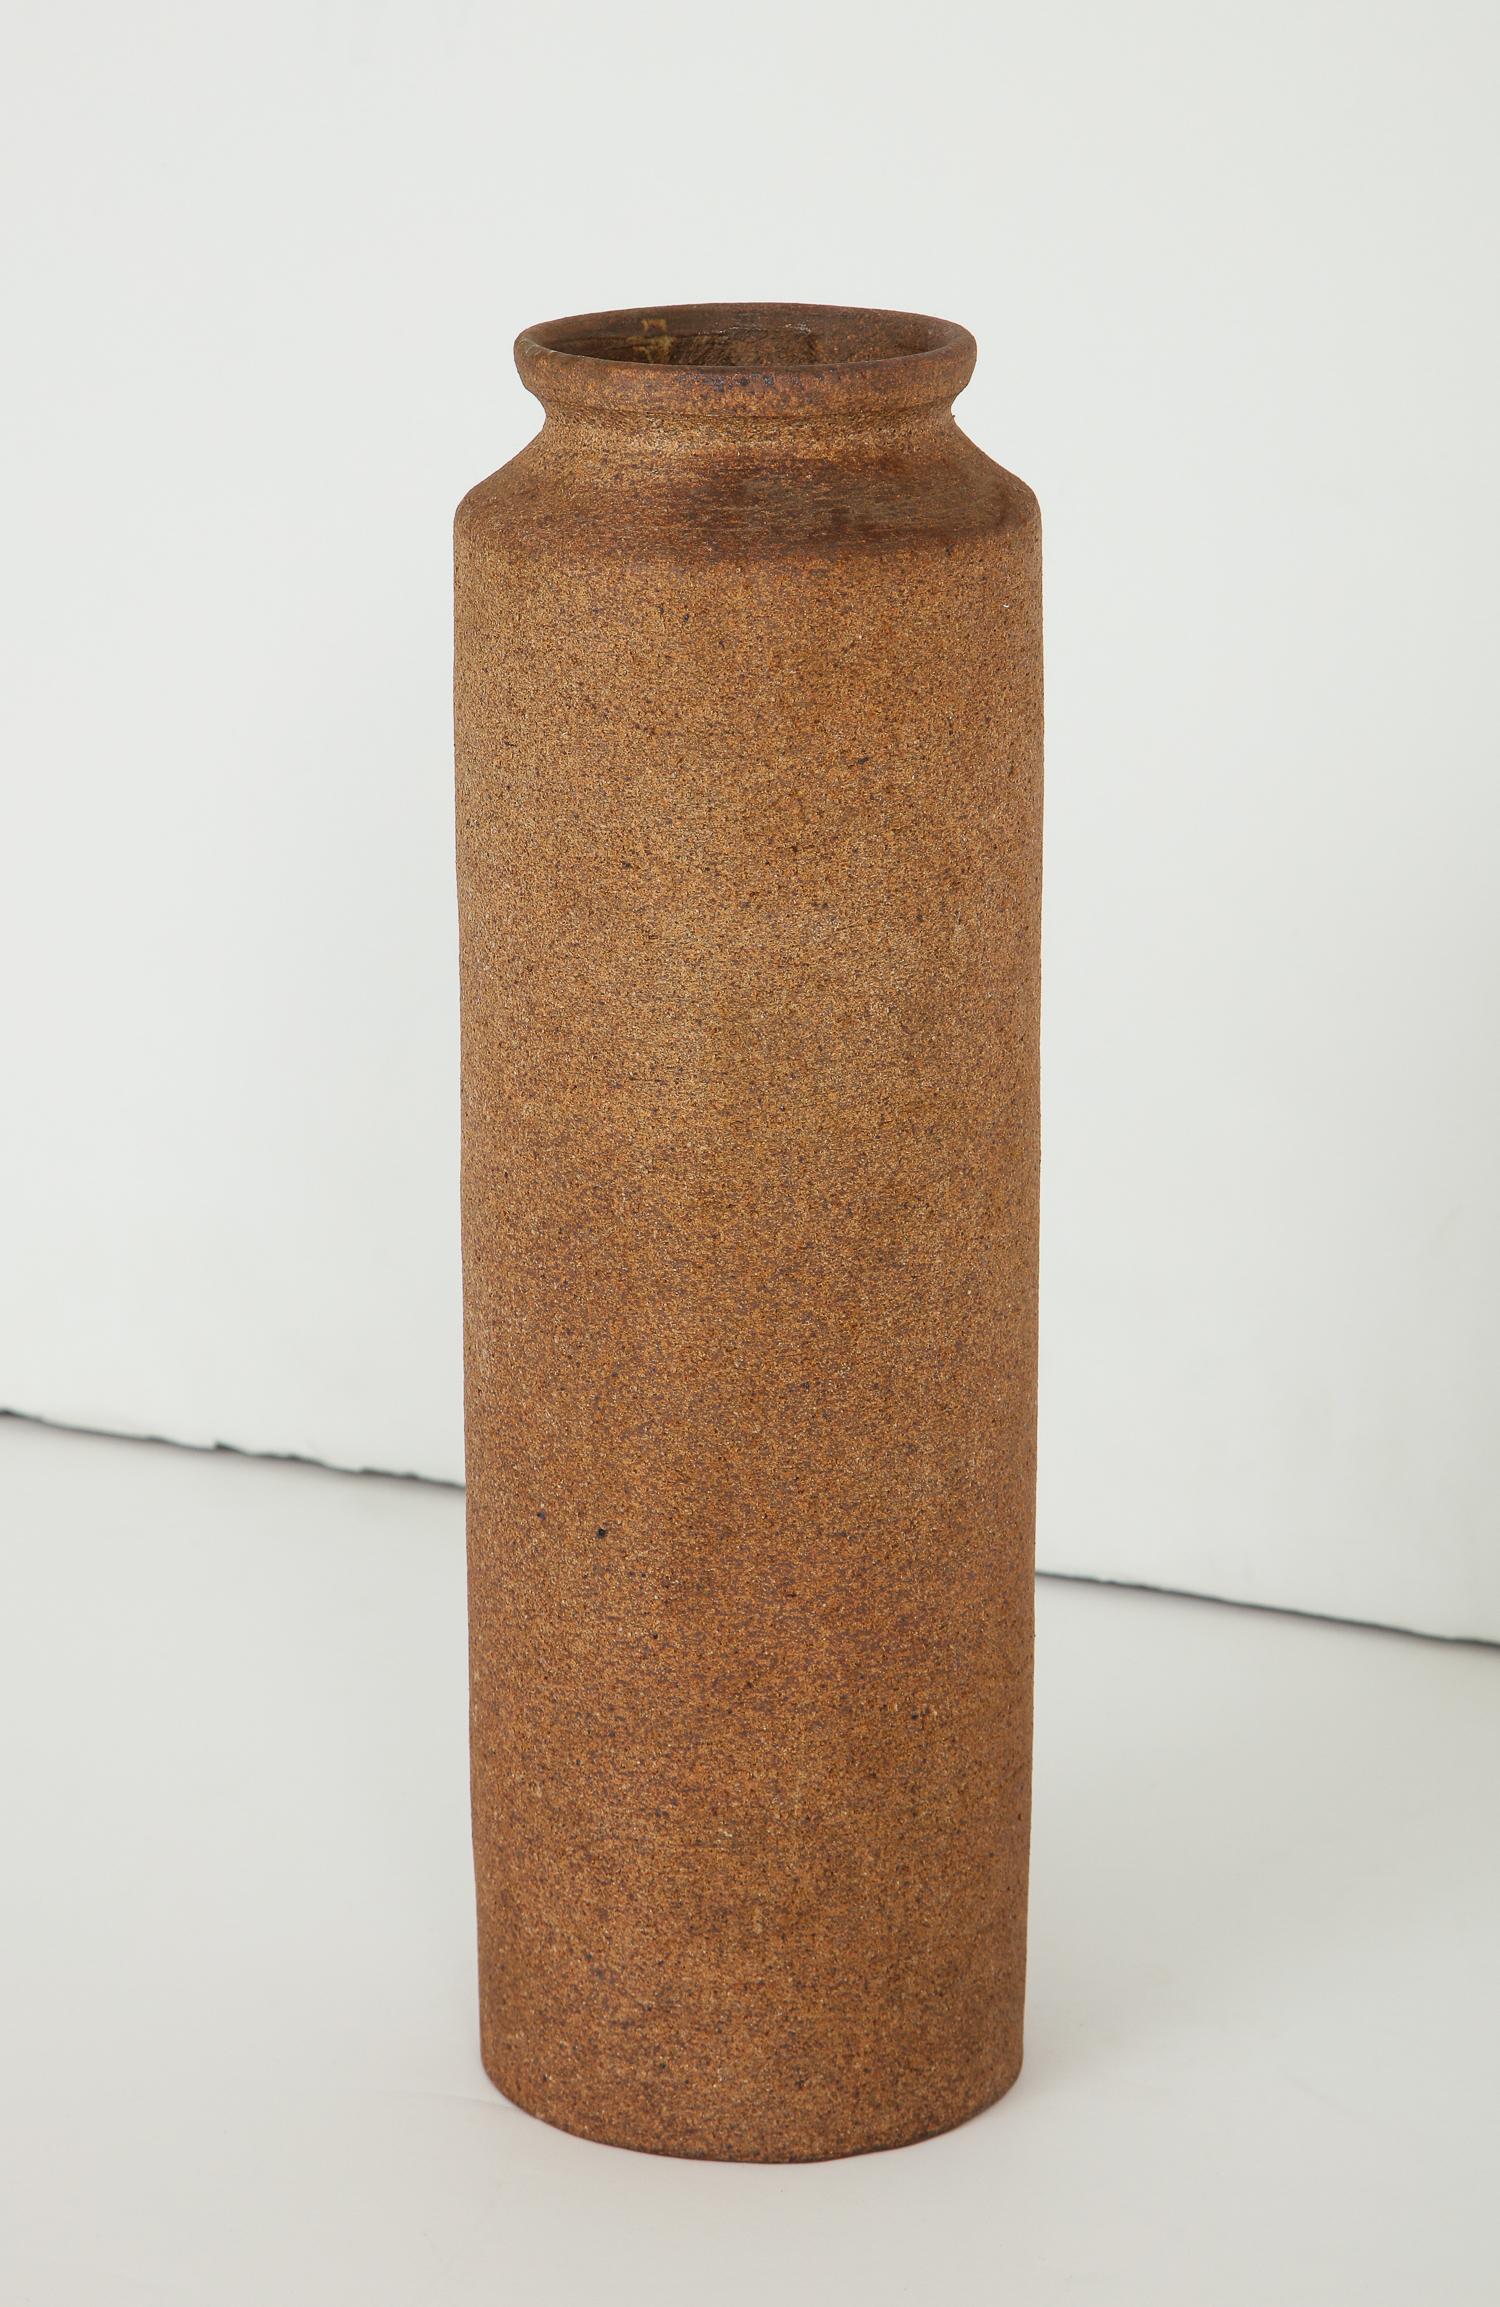 Architectonic cylindrical vessel with tapering rim by Madrid ceramic artist Antonio Salvador Orodea, principal of the ASO factory. Part of a collection associated with the 1964-1965 Wold’s Fair in Flushing Meadows, for which Orodea provided